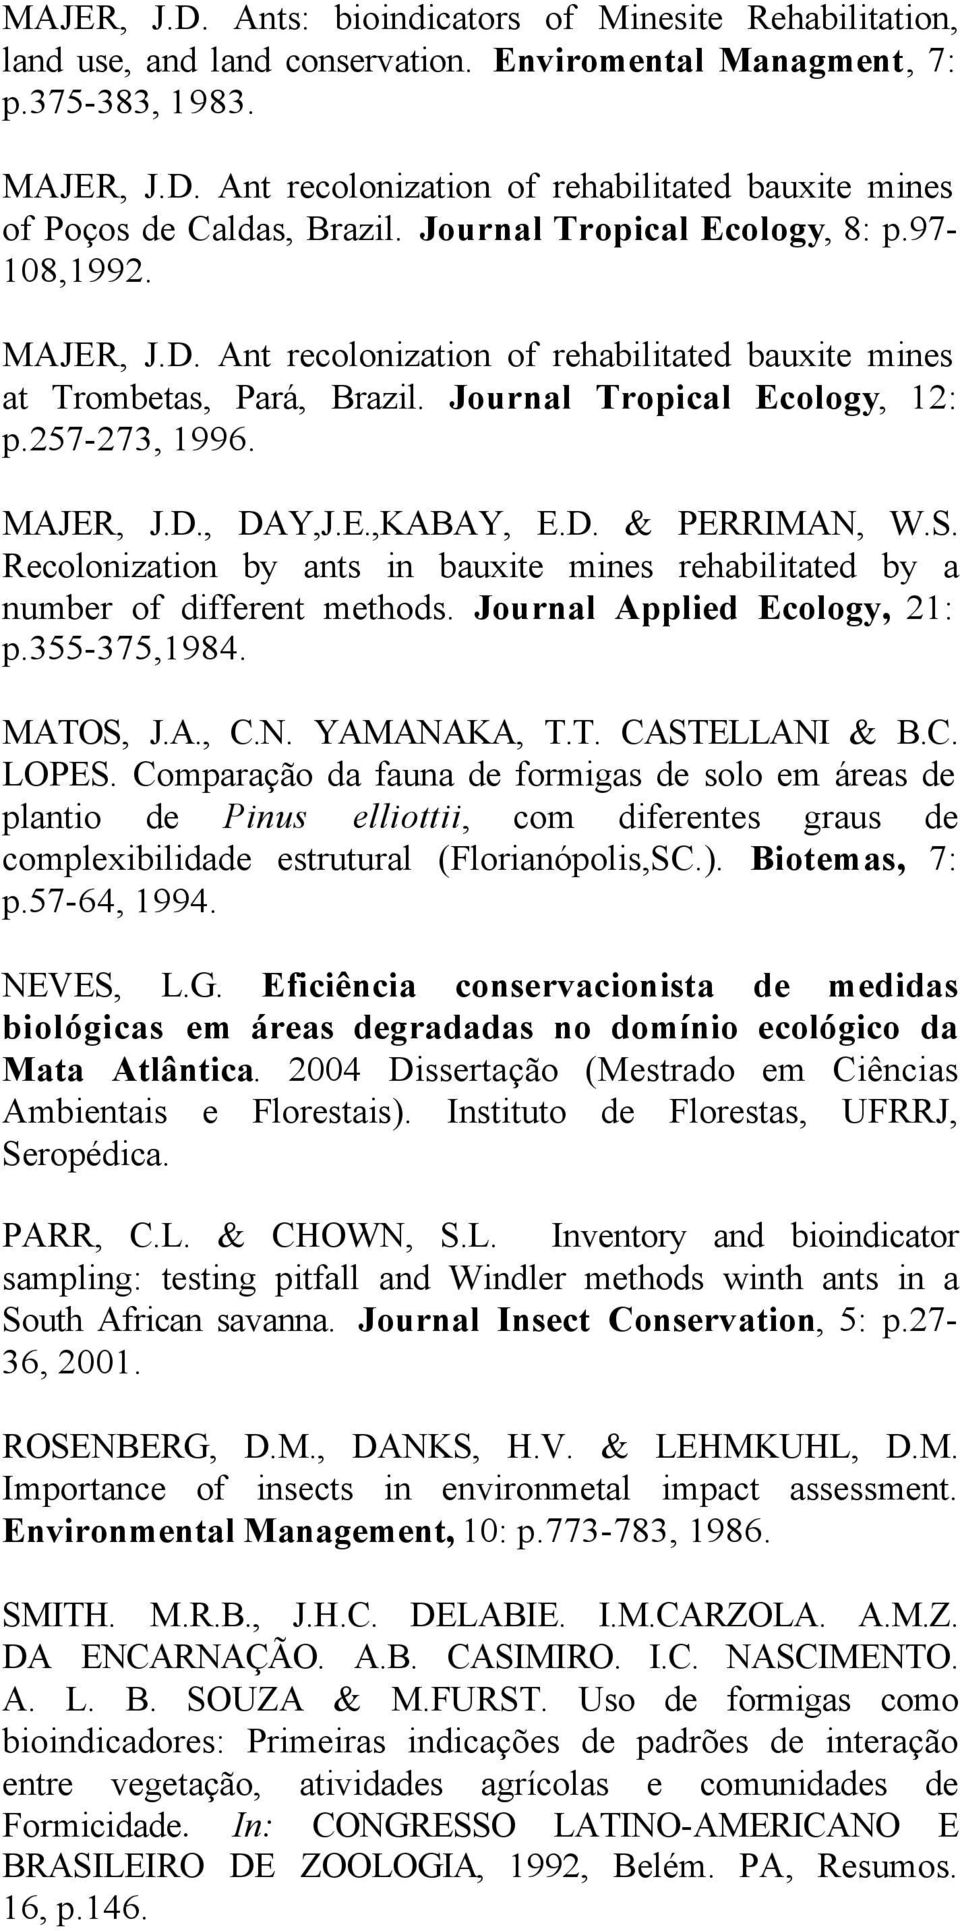 E.,KABAY, E.D. & PERRIMAN, W.S. Recolonization by ants in bauxite mines rehabilitated by a number of different methods. Journal Applied Ecology, 21: p.355-375,1984. MATOS, J.A., C.N. YAMANAKA, T.T. CASTELLANI & B.